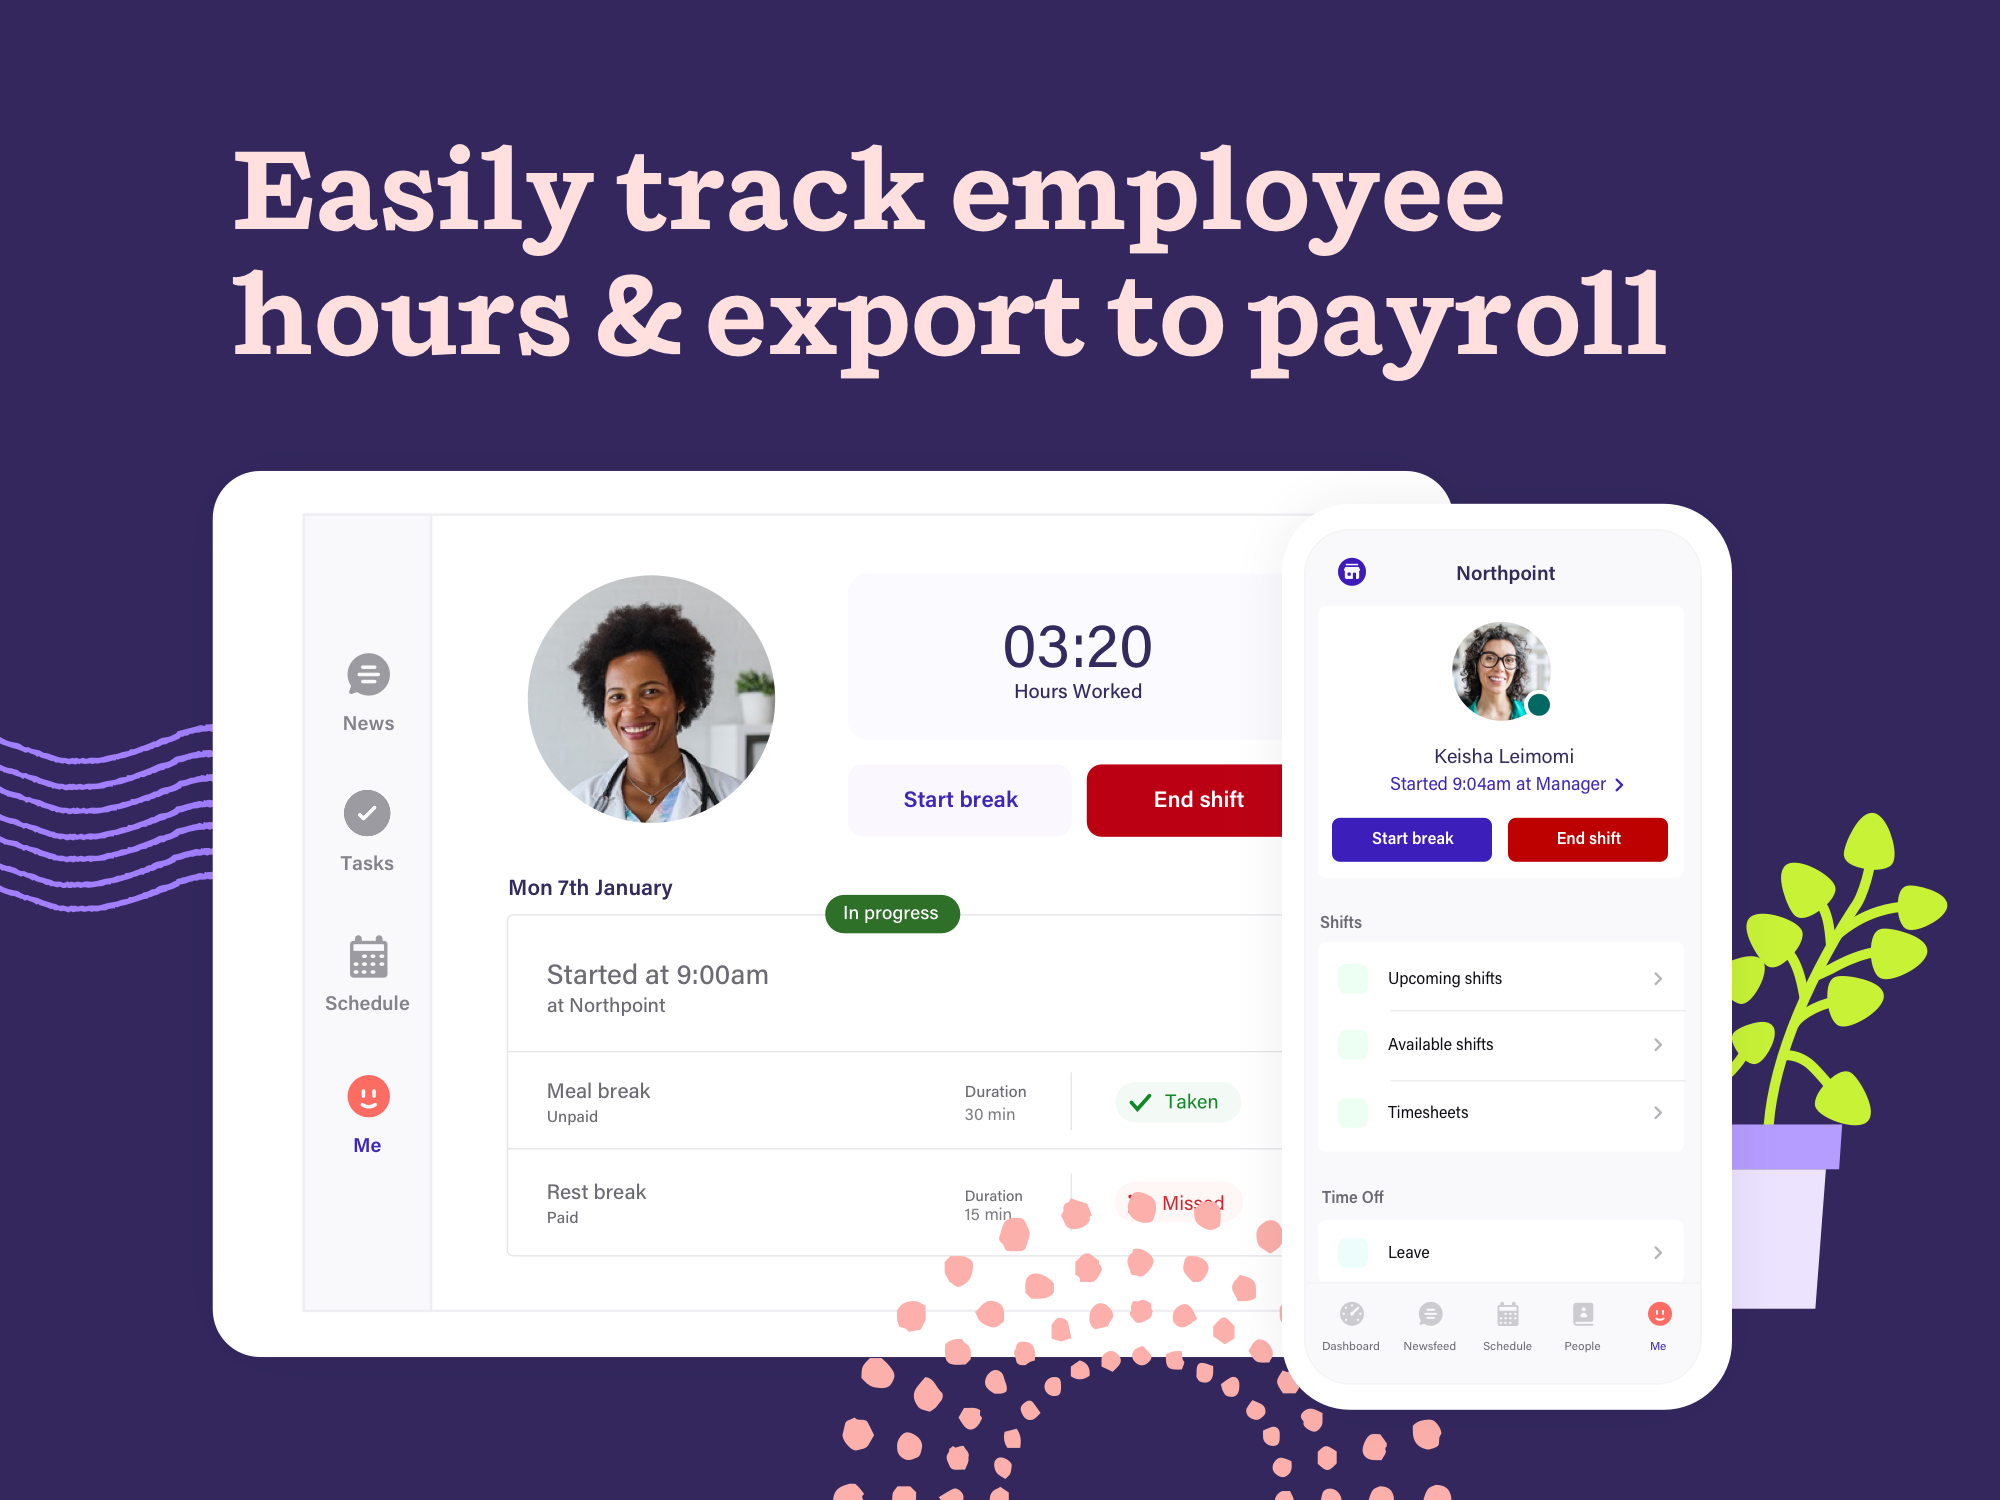 Deputy Software - Make it simple for employees to clock in and out from any device, with geolocation capture and facial recognition. 
Streamline timesheets and attendance records, seamlessly export to payroll.